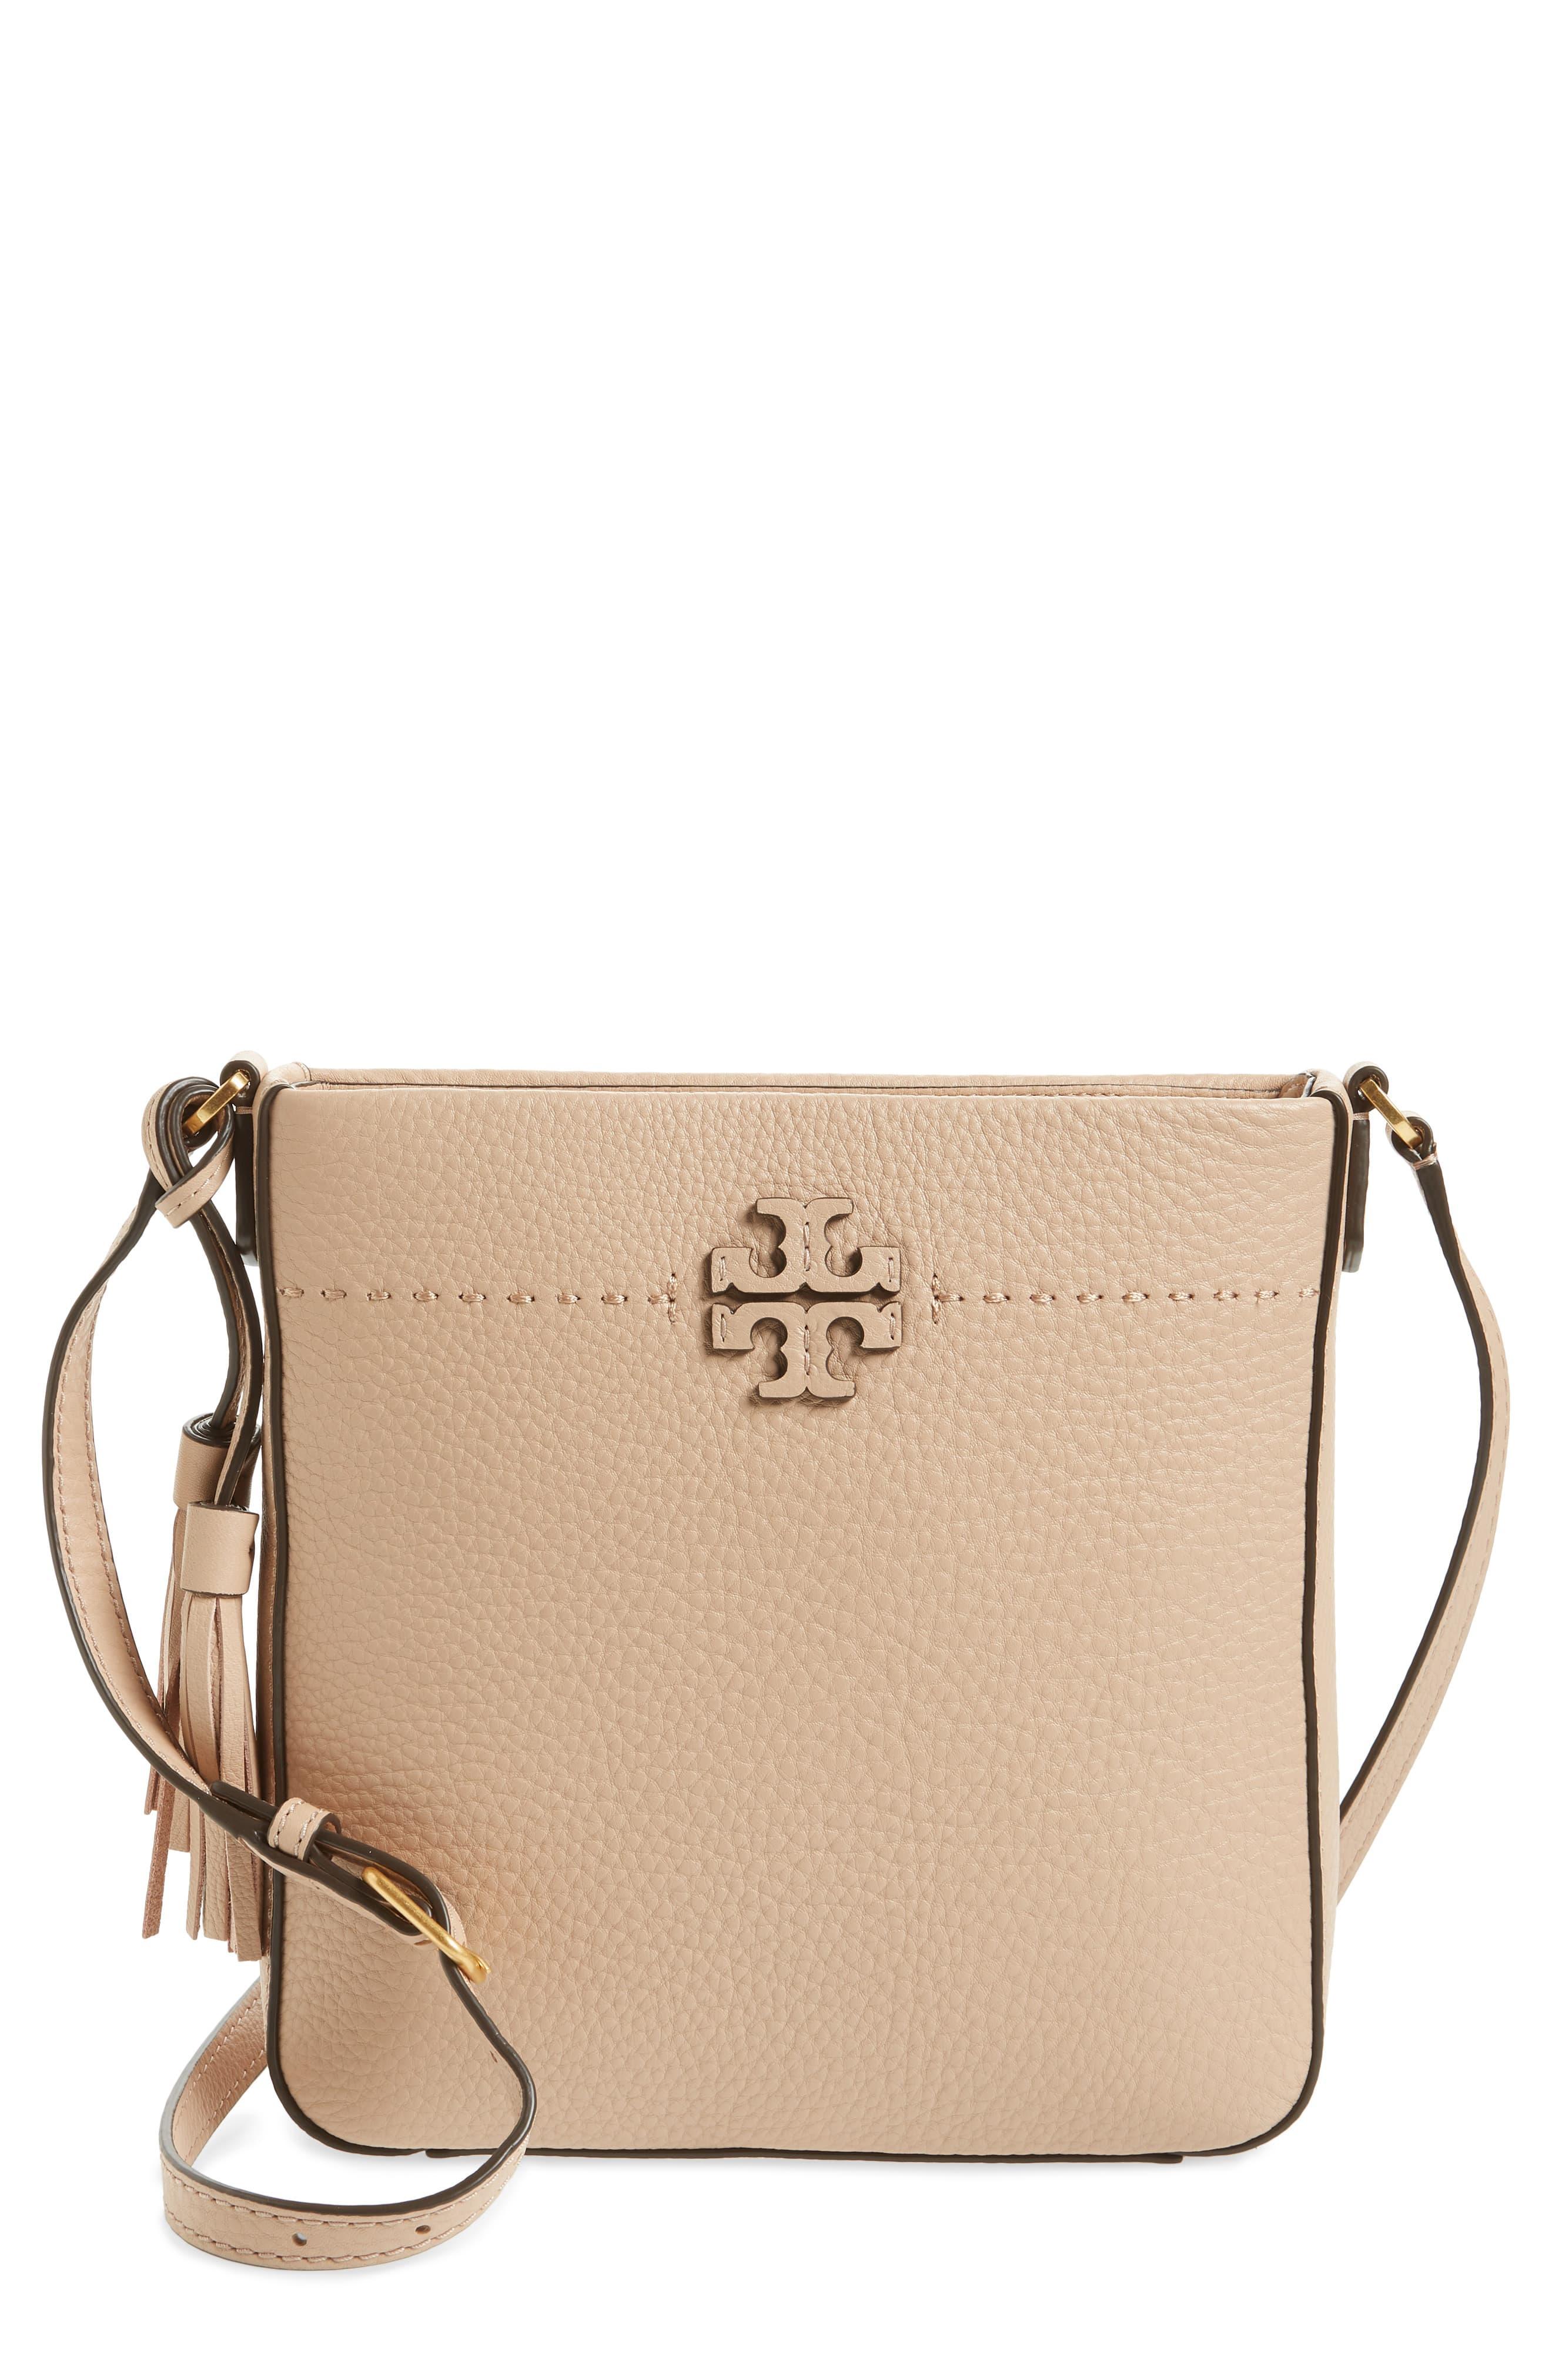 Tory Burch Mcgraw Leather Crossbody Tote in Red - Lyst